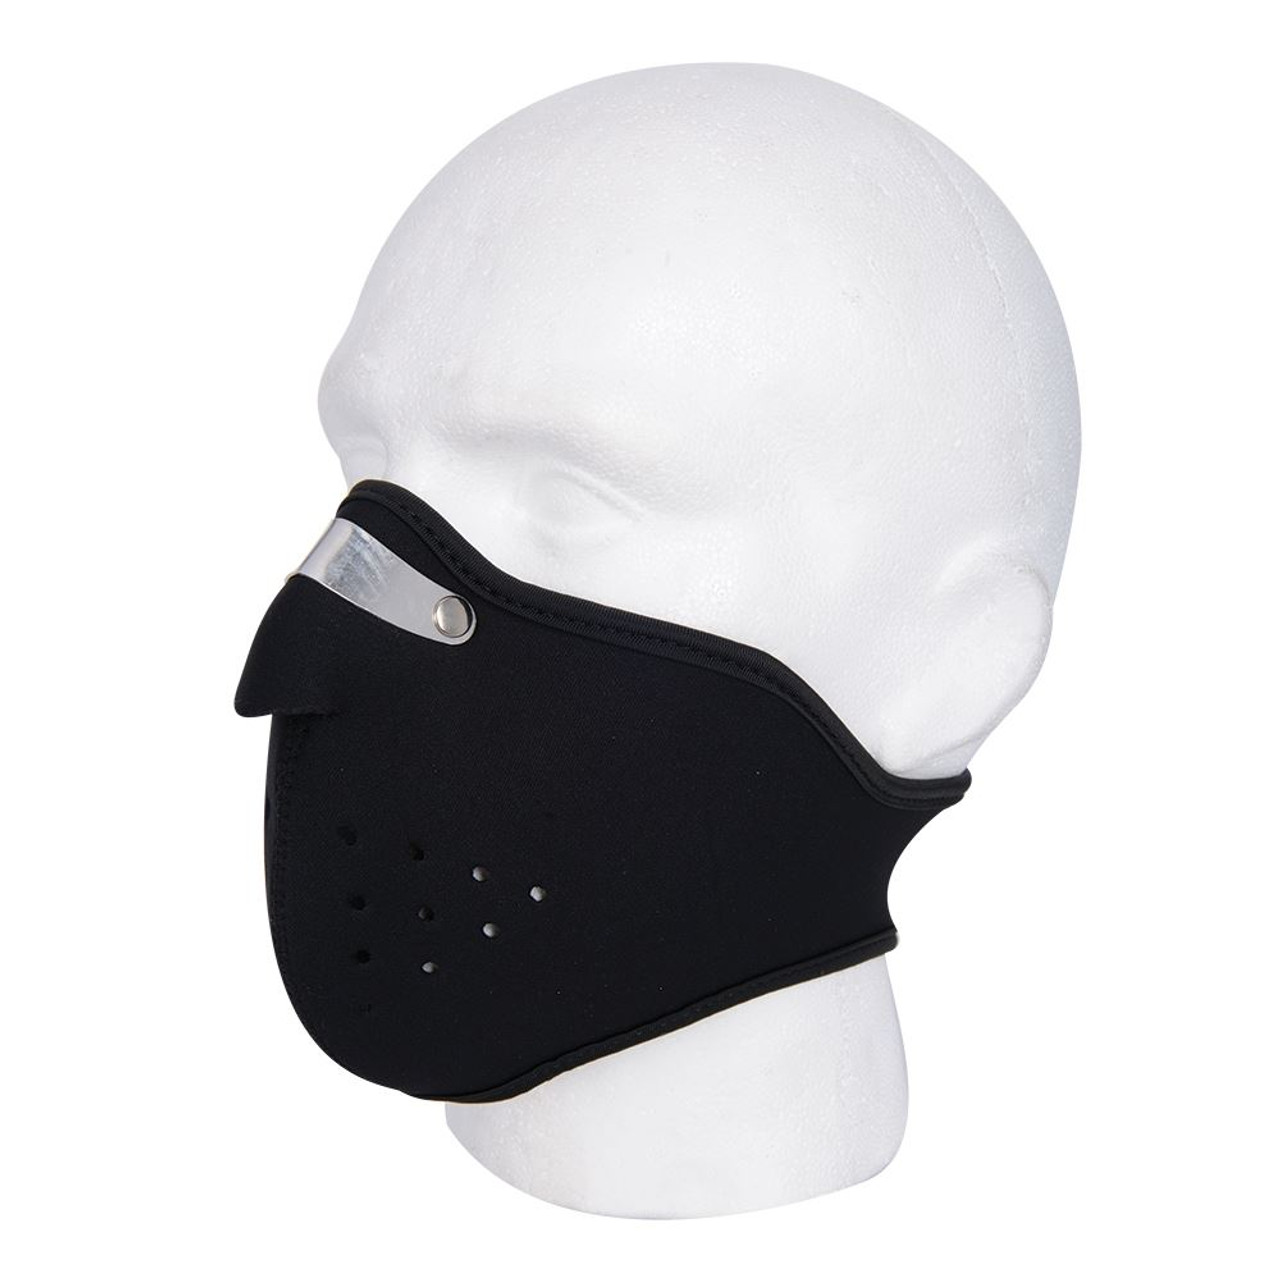 Buy Oxford Universal Anti-Fog Motorcycle Mask Black at the best price |  mybikesolutions.co.uk